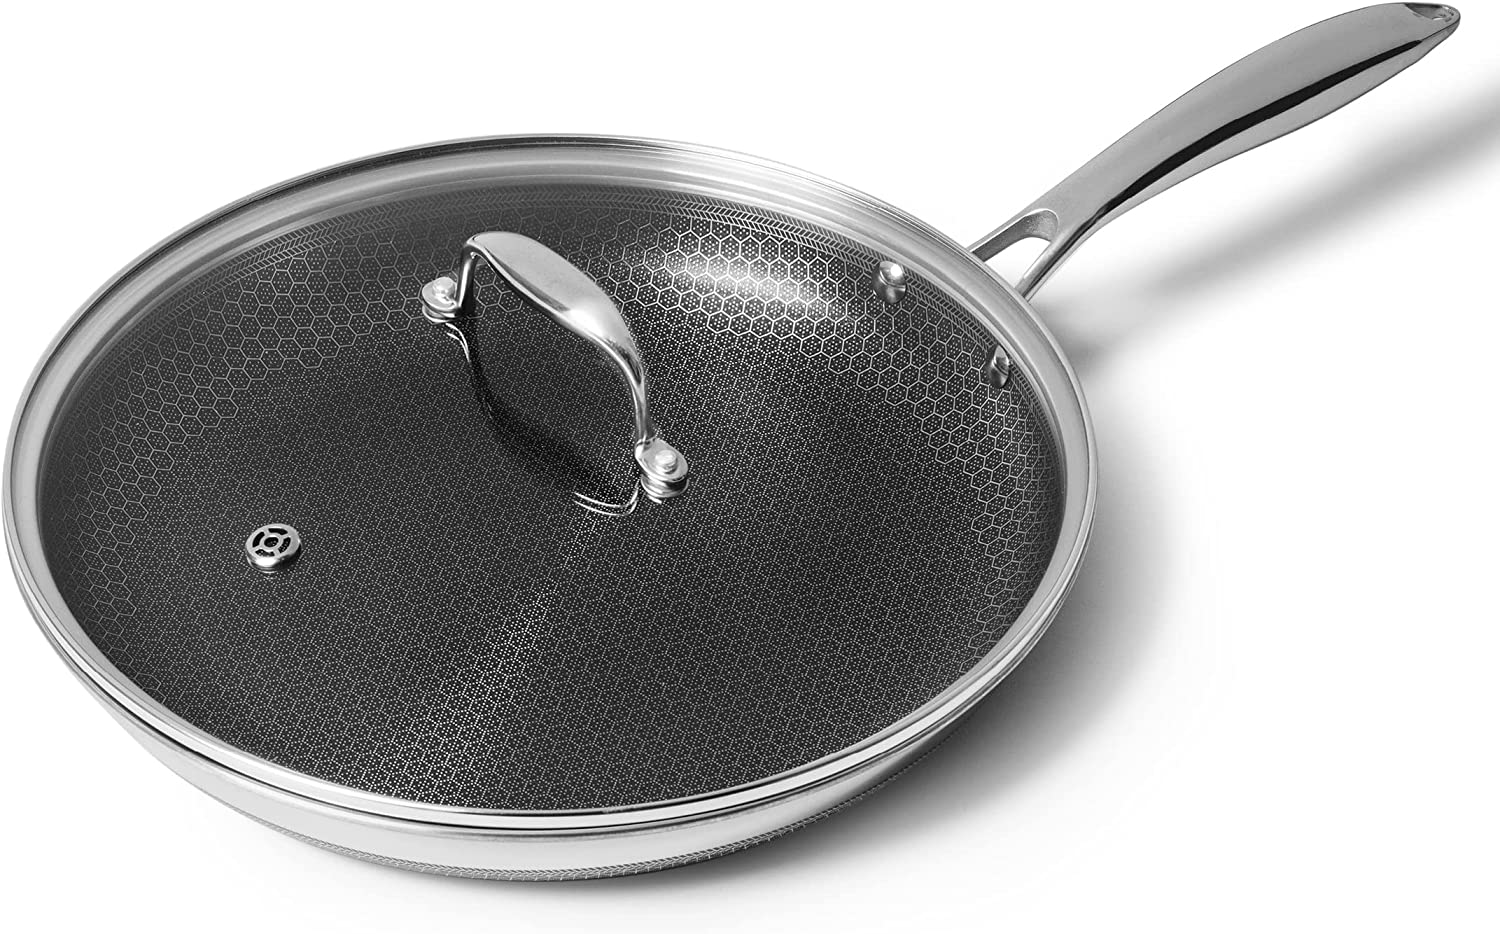 Hexclad 12 inch fry pan for induction cooktop